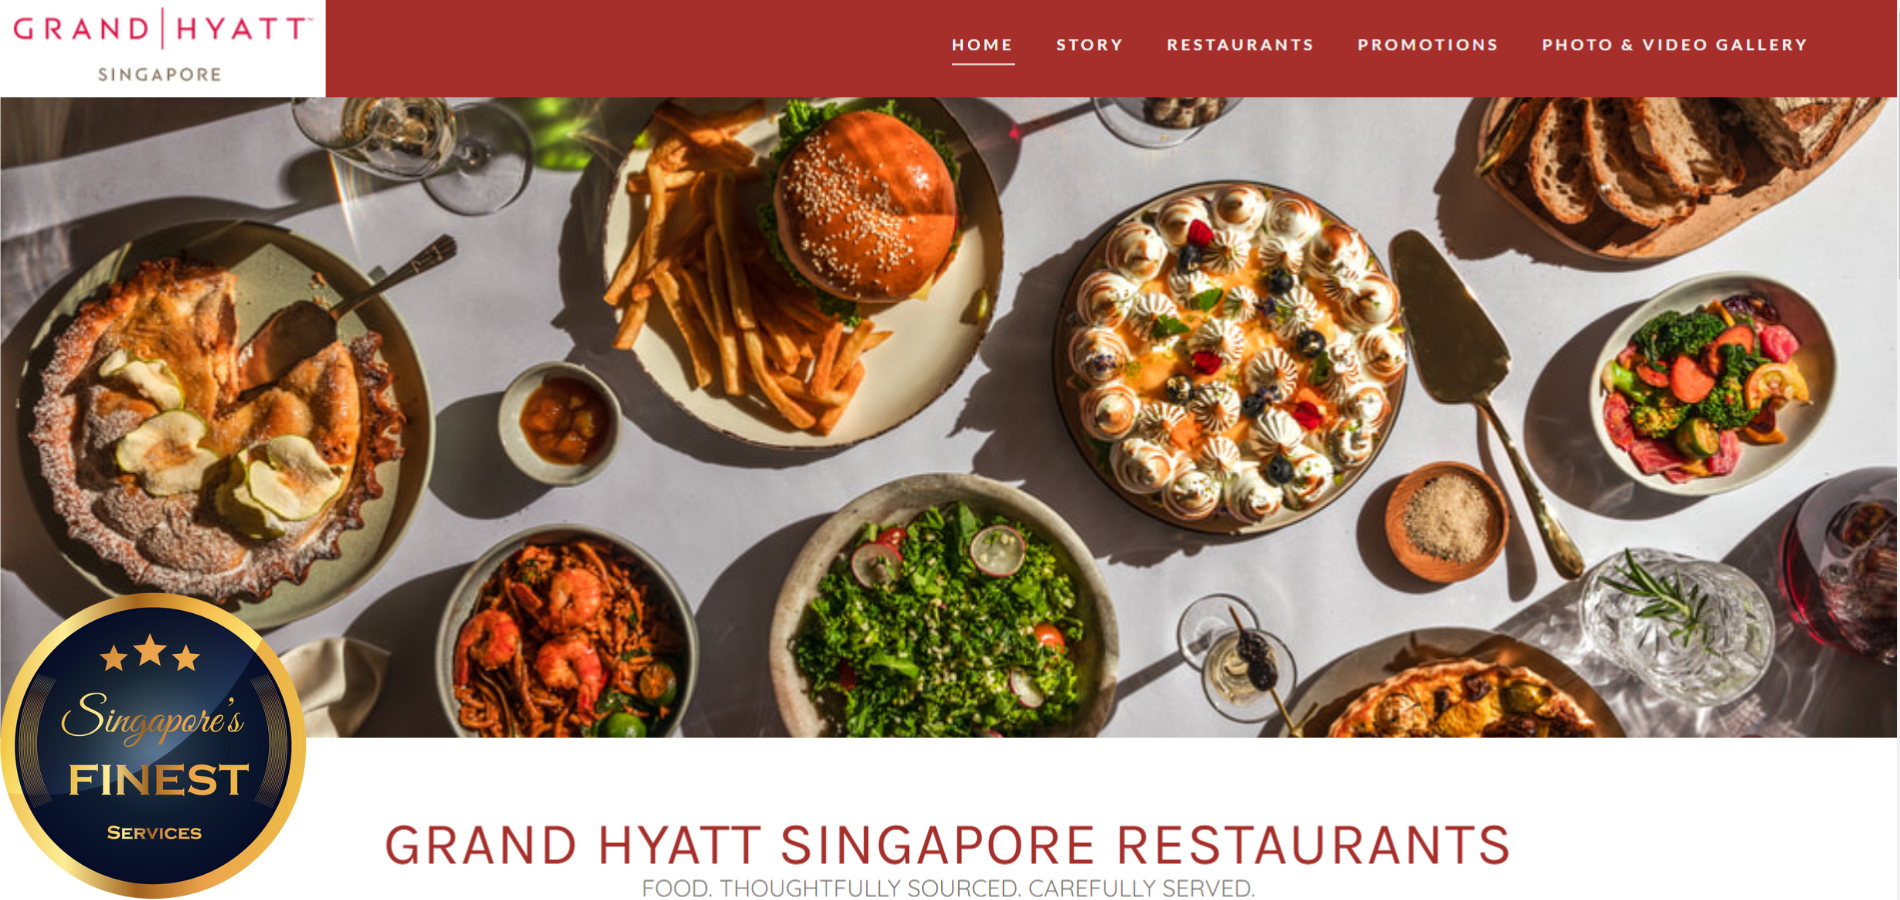 The Finest Restaurants in Orchard Road